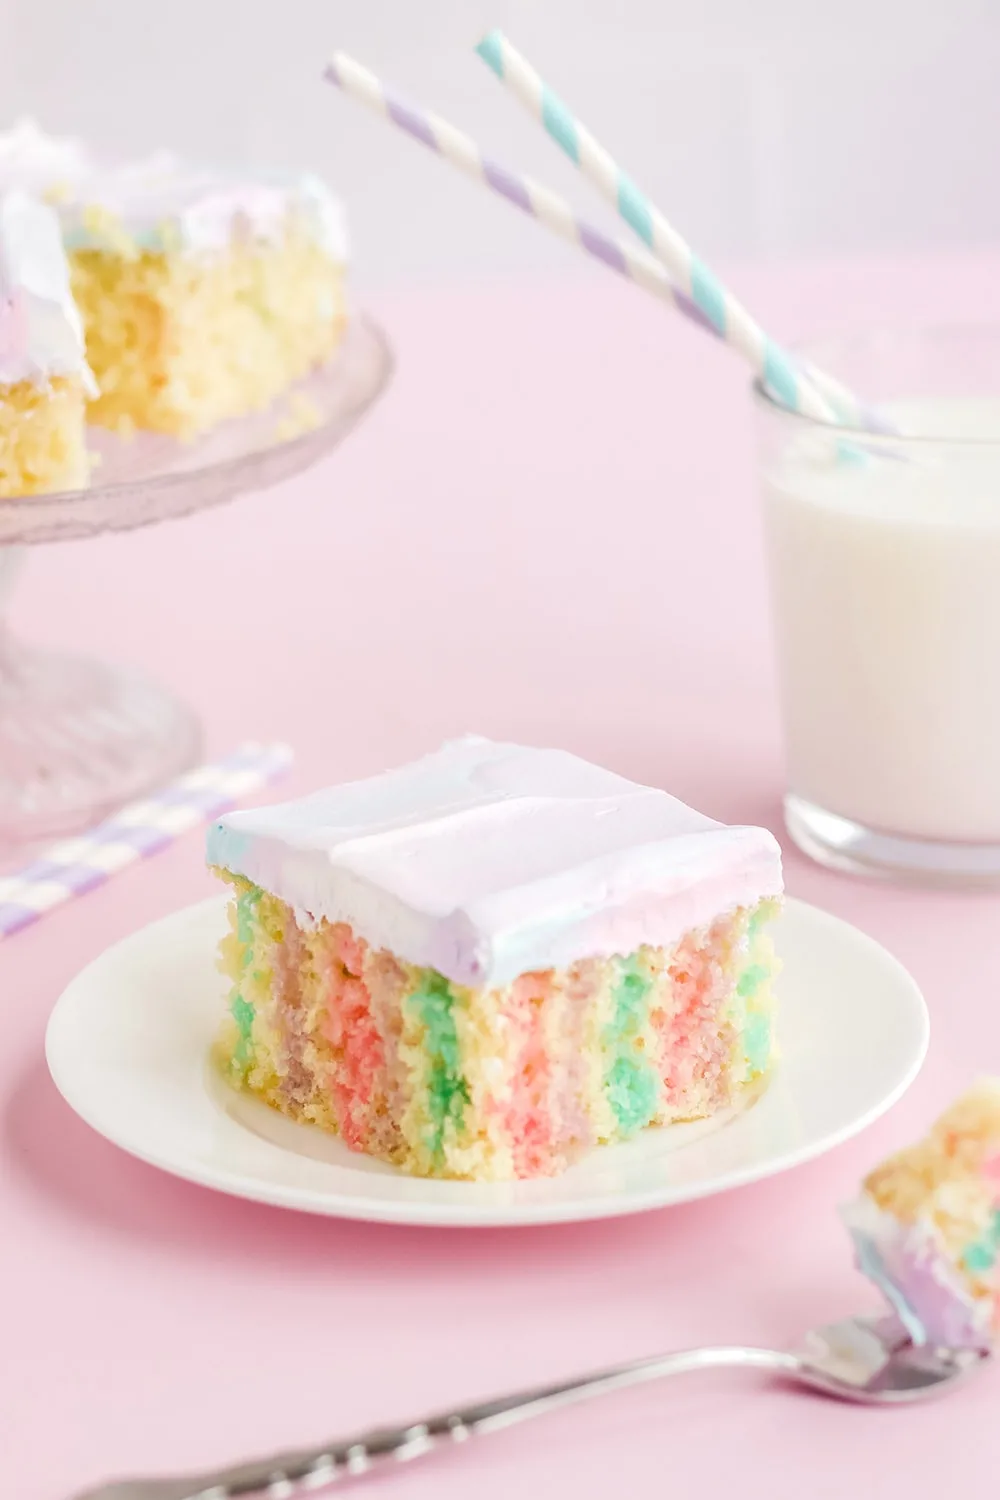 Colorful cake on a plate with milk and more cake in the background.